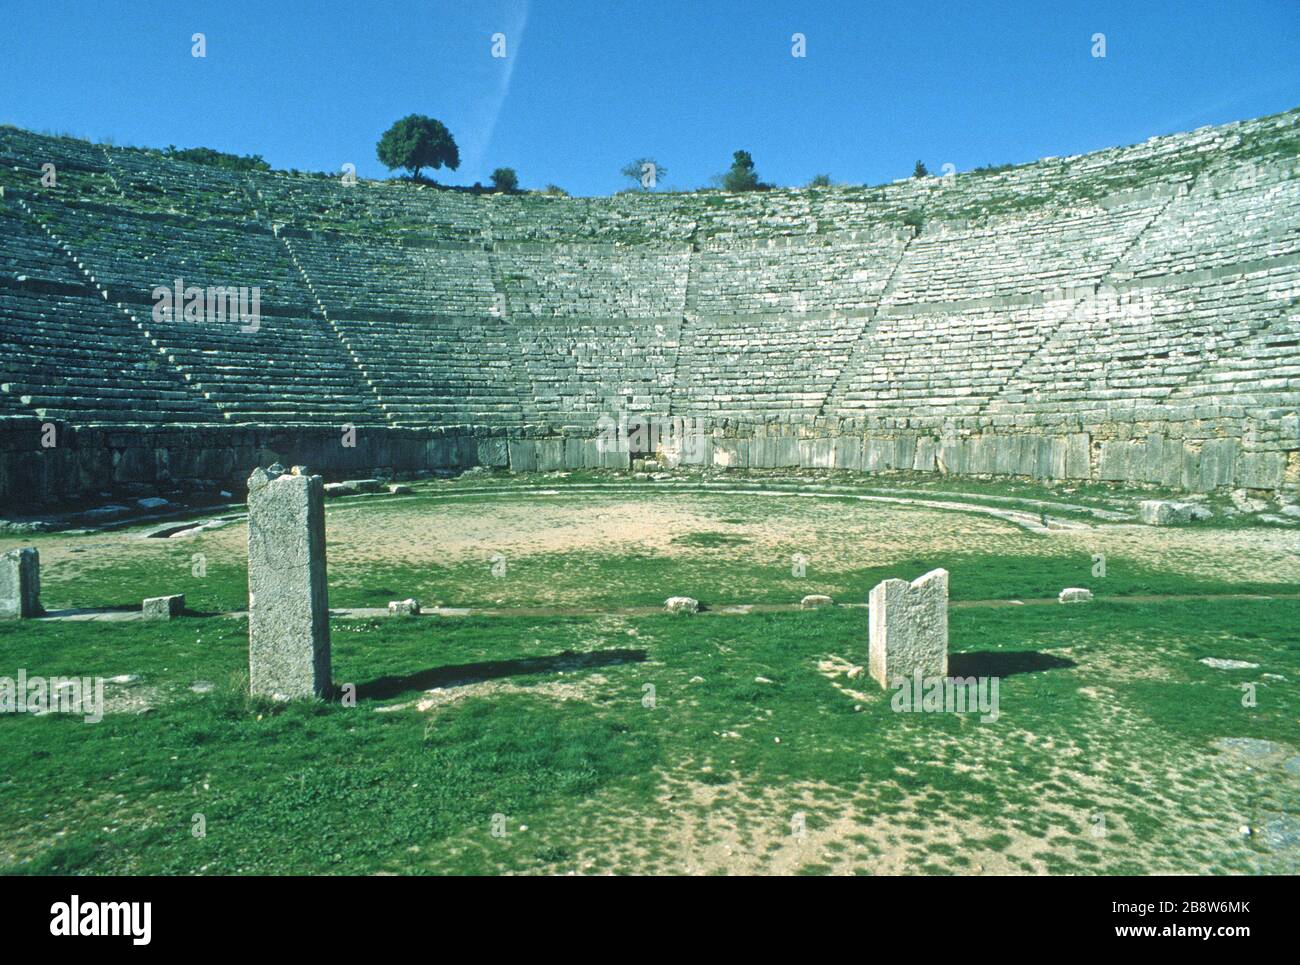 The ancient Greek theatre at Dodoni, Ioannina, Epirus, Greece, seen from the performers view, showing curved rows of stone seats looking down on the stage and steps up to each level. Blue sky in the background. Dodoni is one of 15 Ancient Greek Theatres with tentative status as a UNESCO World Heritage Site. Stock Photo